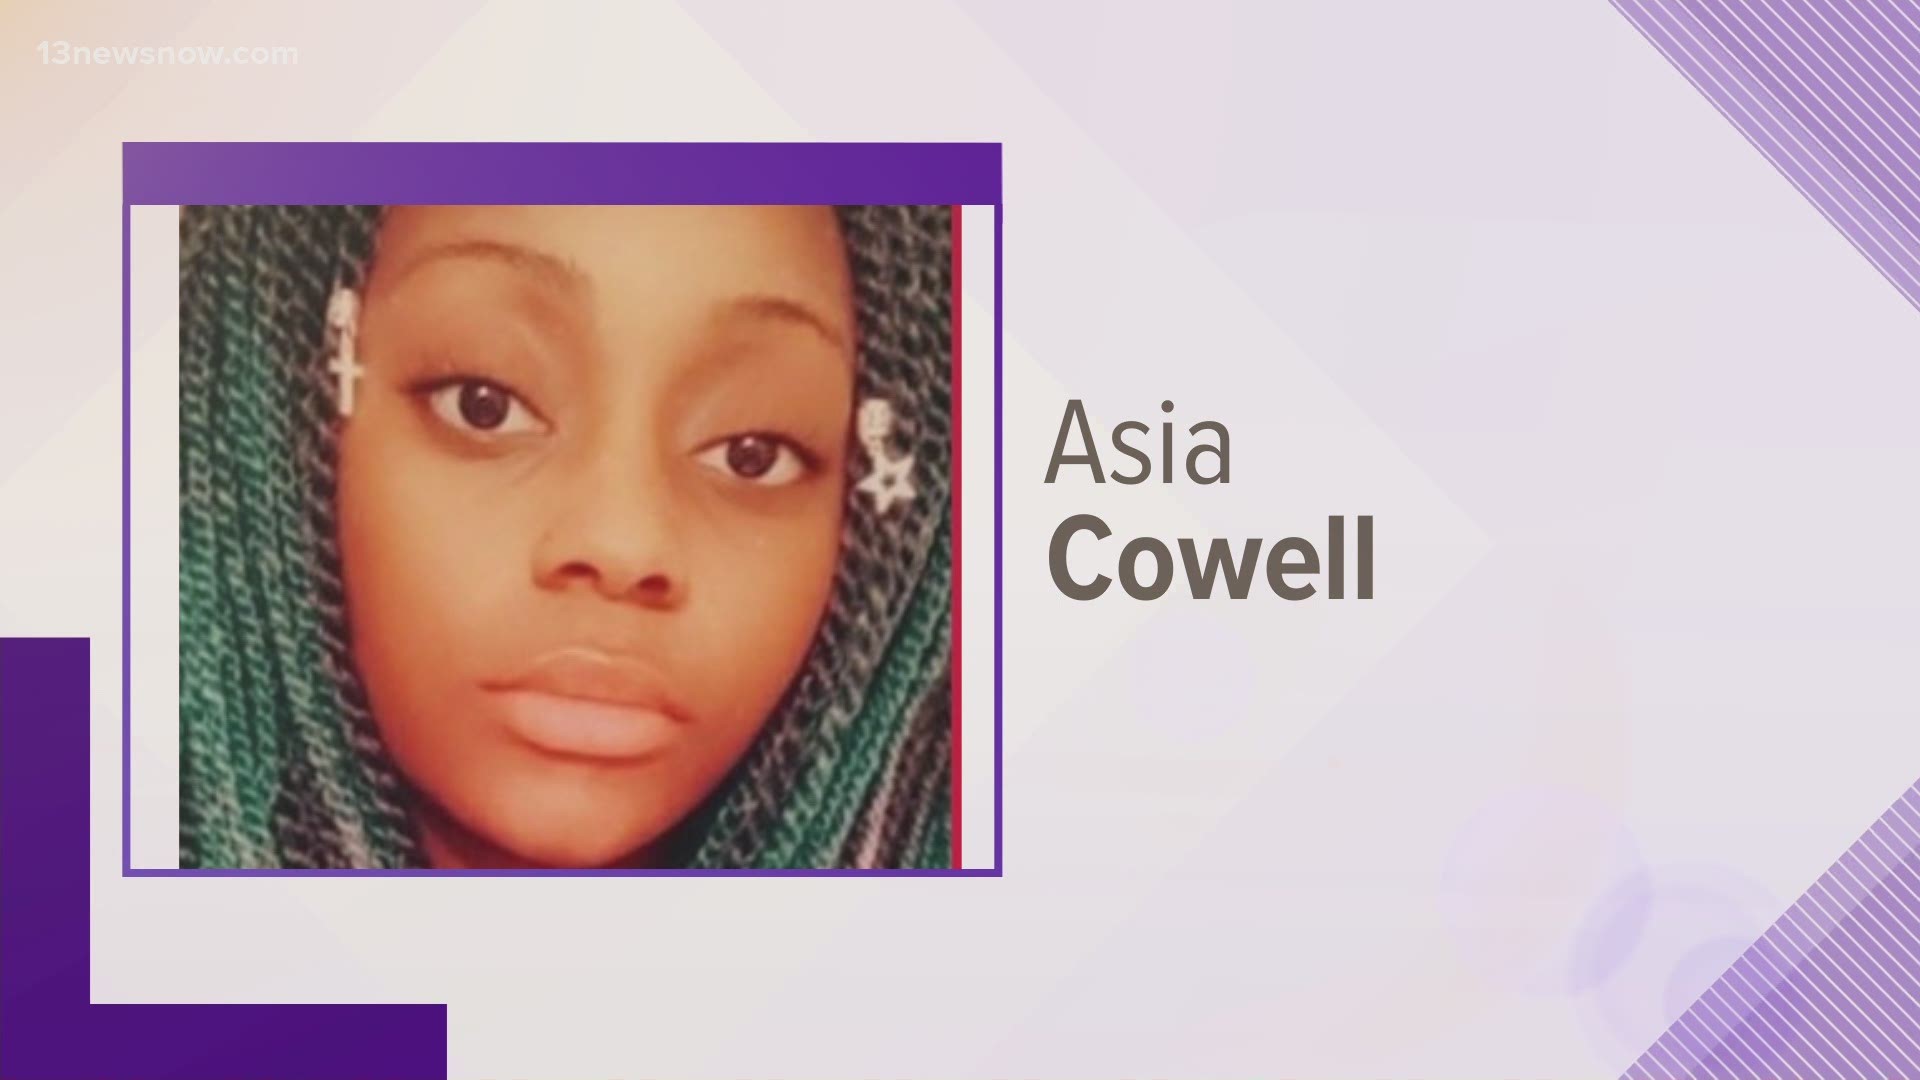 Asia Cowell was last seen in Norfolk on Sept. 7. The 17-year-old's body was found in Newport News. Police say her death is being investigated as a homicide.